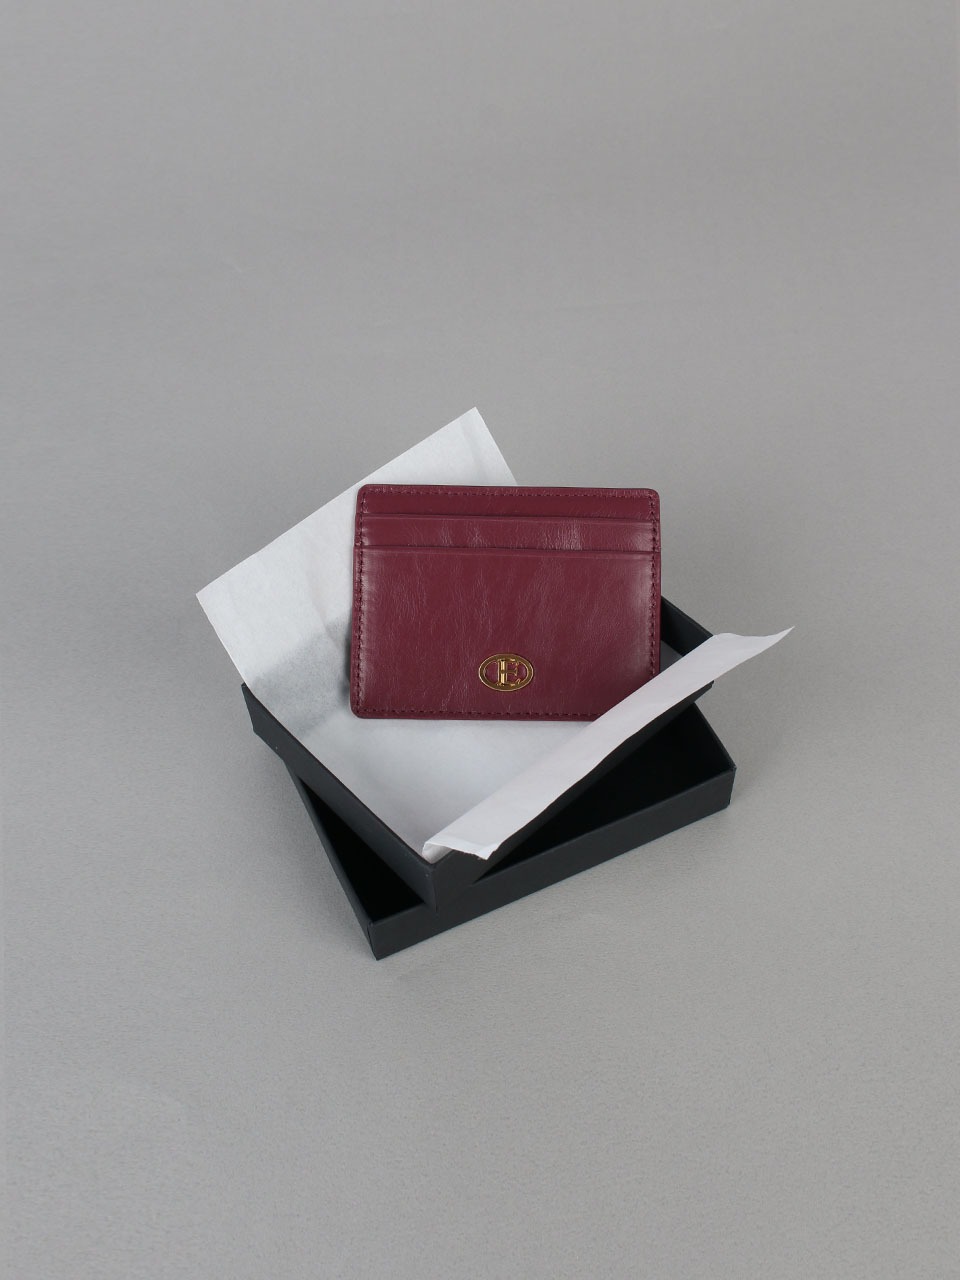 CLASSIQUE LOGO CARD WALLET IN RED